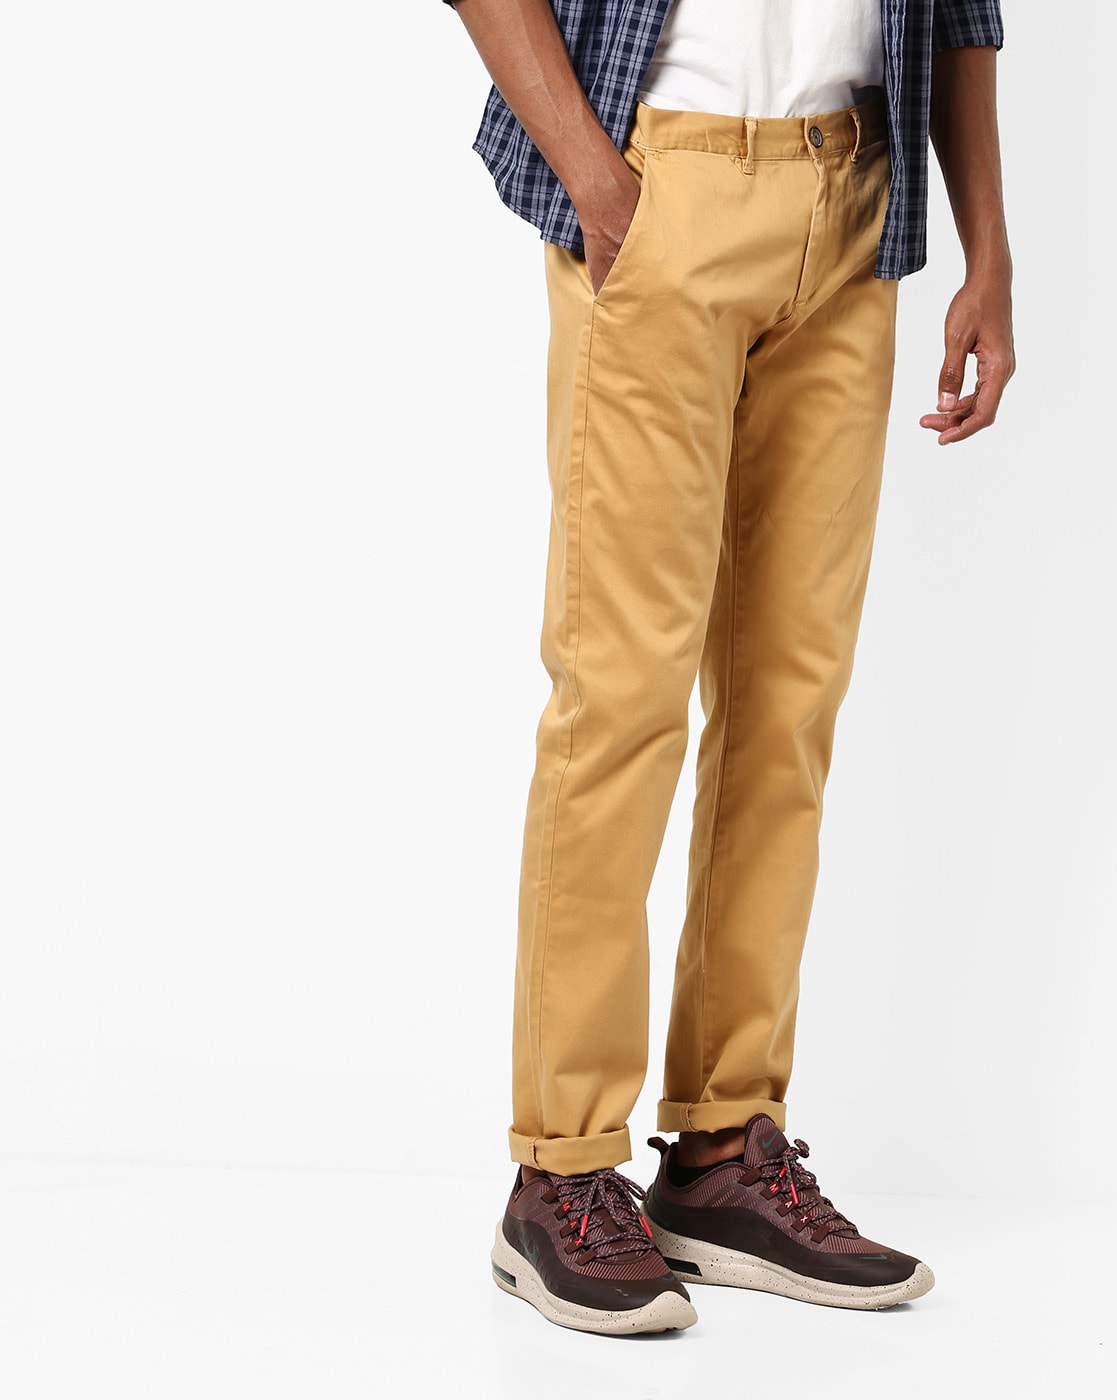 Red Camel Vintage Cargopants Mens Fashion Bottoms Trousers on Carousell